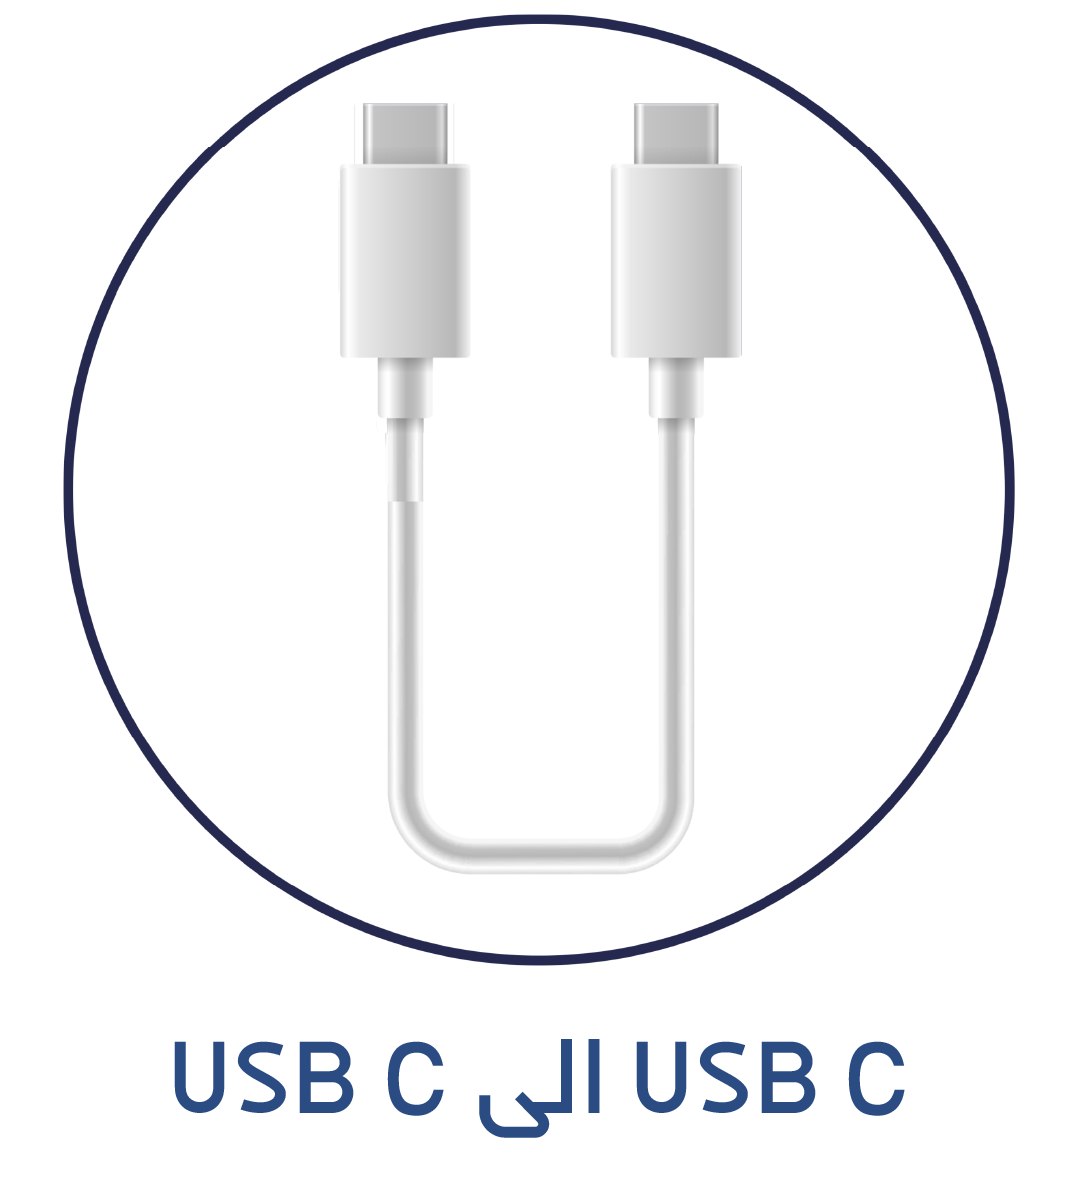 usb c to usb c cables